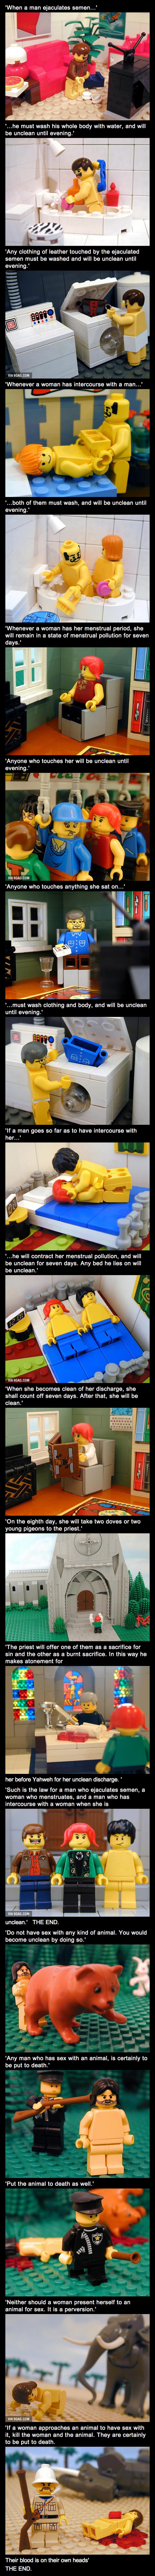 laws from leviticus, delivered through 'artfully' posed legos.